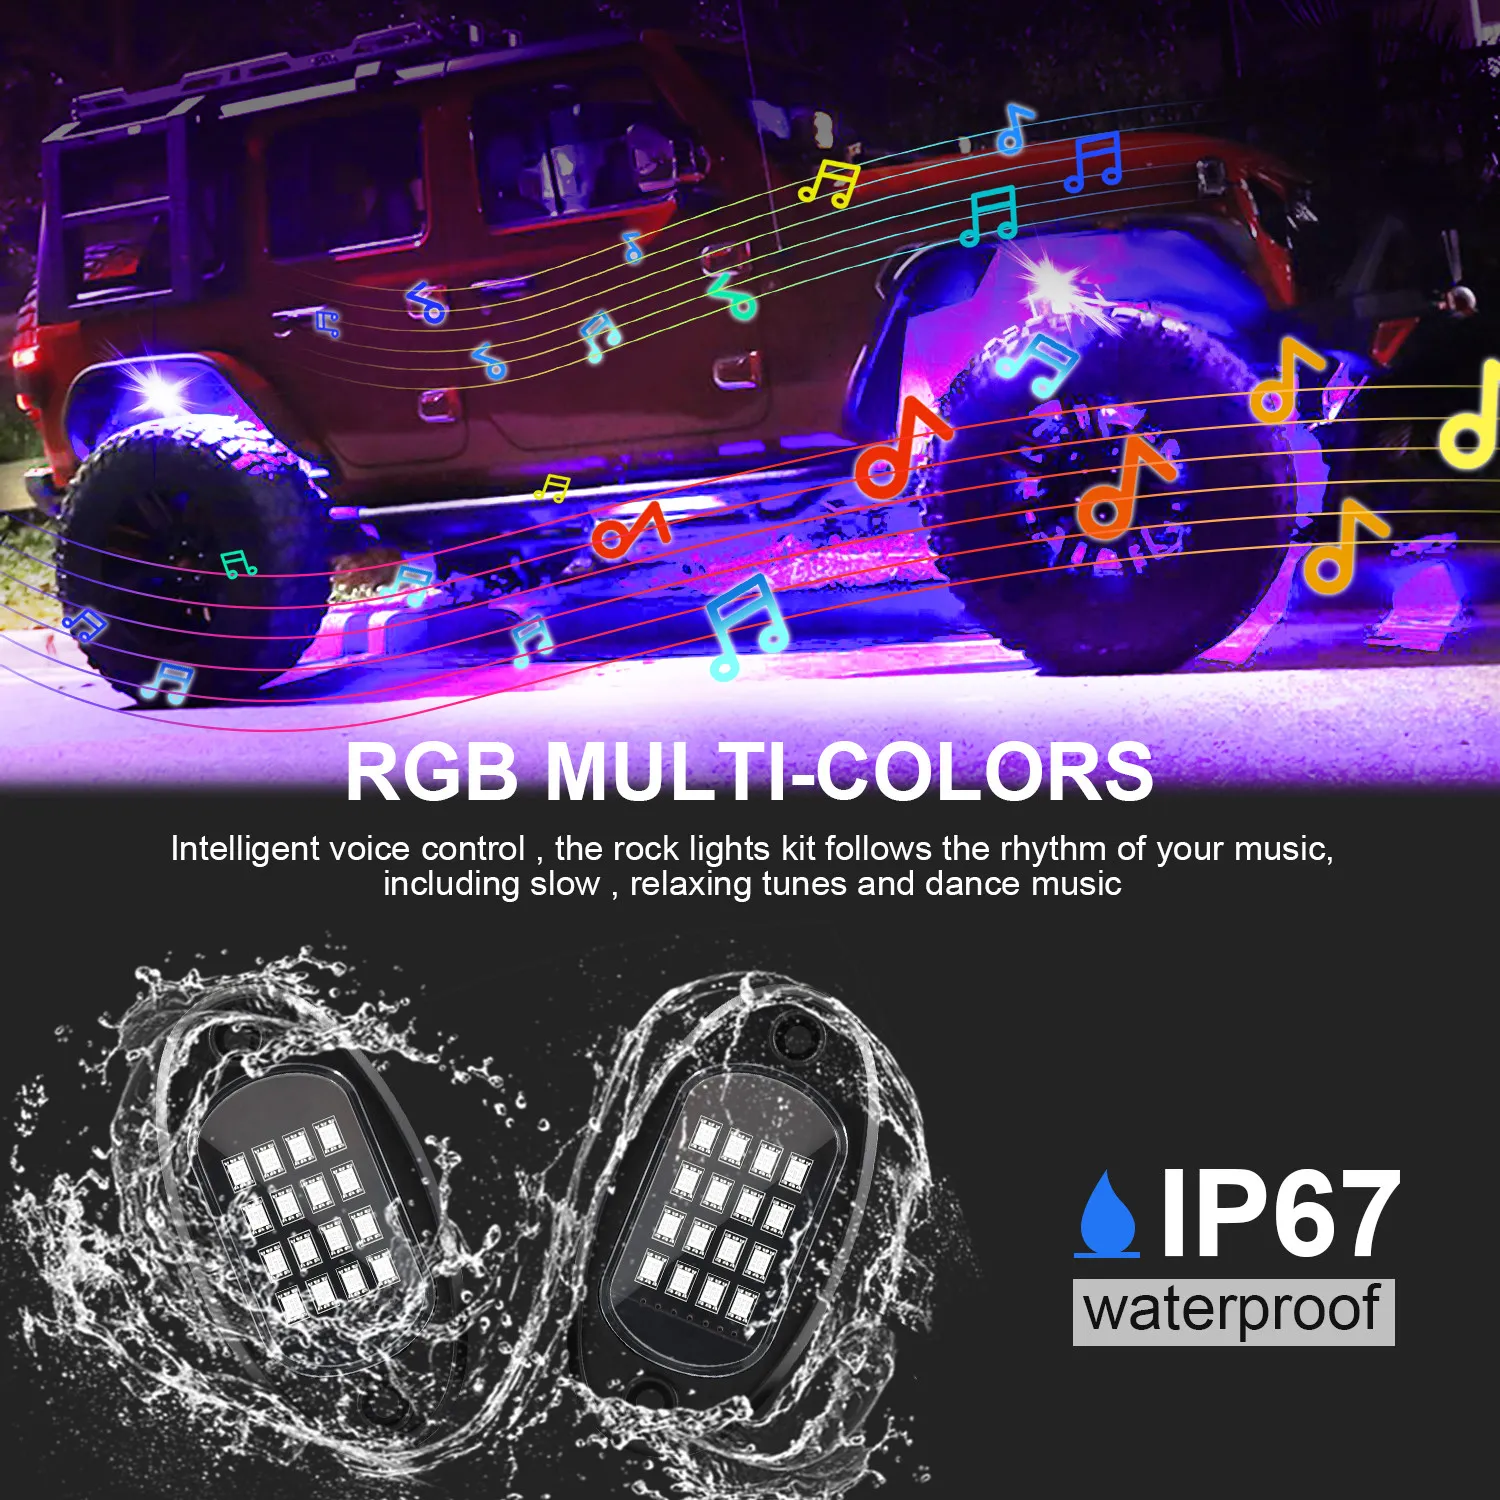 RGB LED Rock Lights BluetoothCompatible App Control Music Sync Car Chassis Light Undergolw Watertofe Neon Light for Car2435175